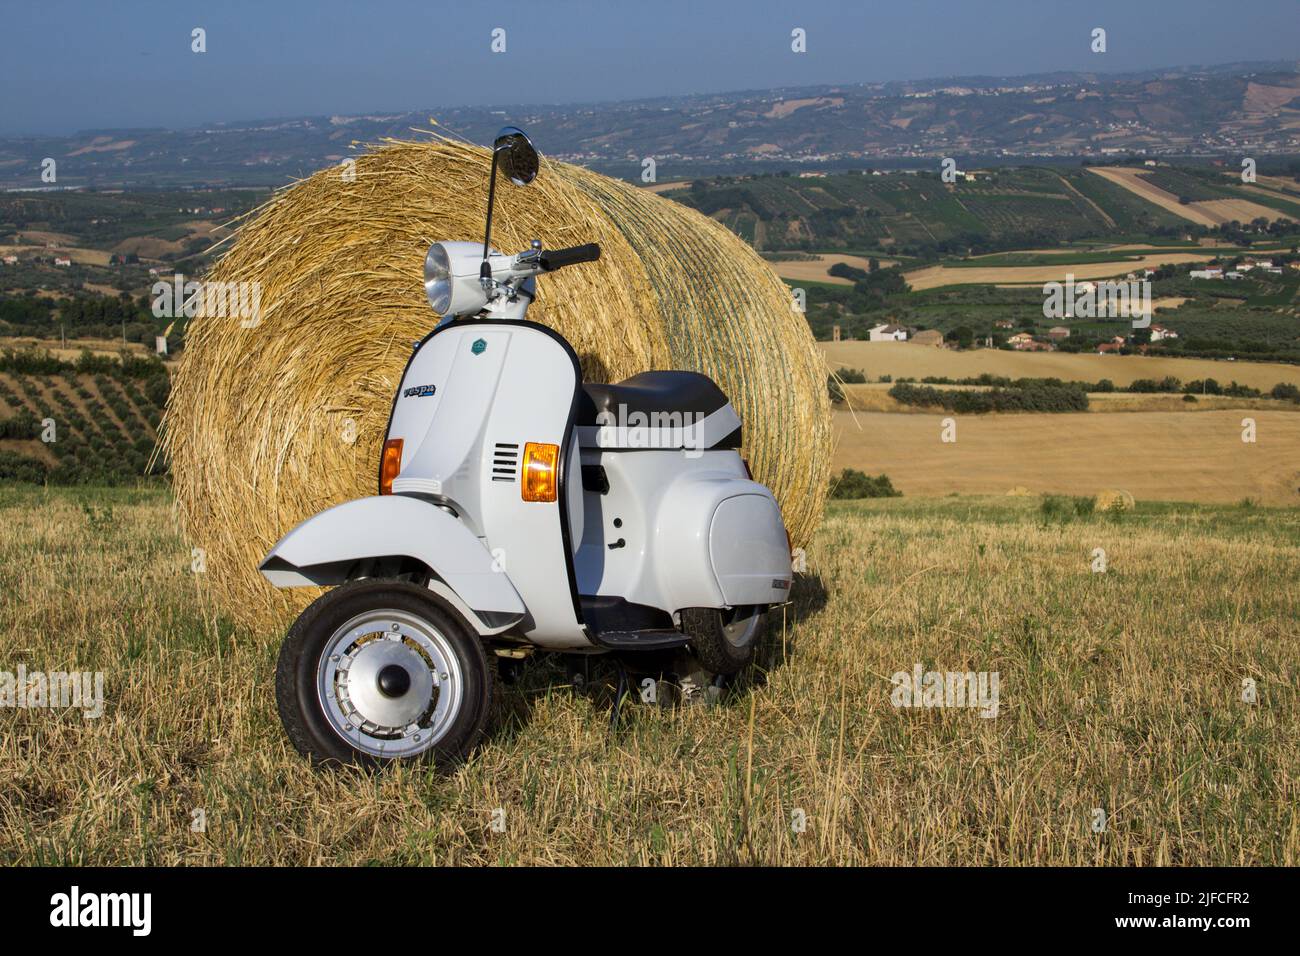 Image of an old Piaggio vespa motorcycle in a field with straw bales. Date 29-06-2022 Tuscany Florence Italy Stock Photo